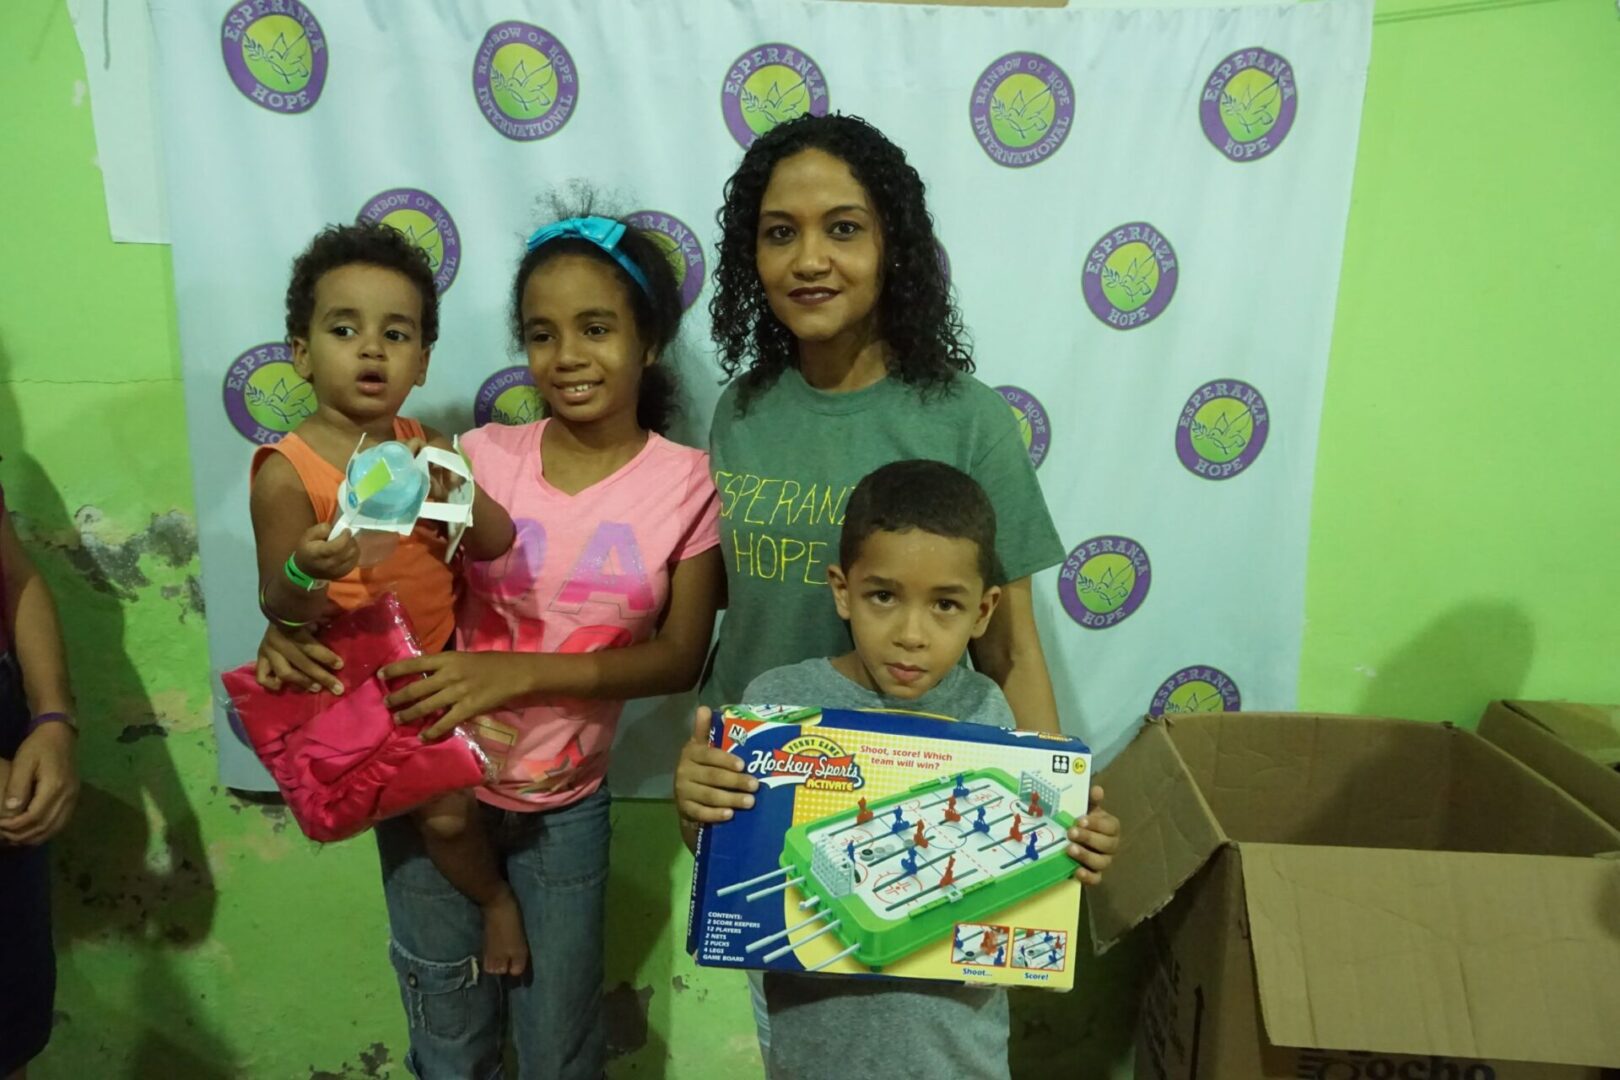 A staff and three children holding toys, standing in front of a green wall